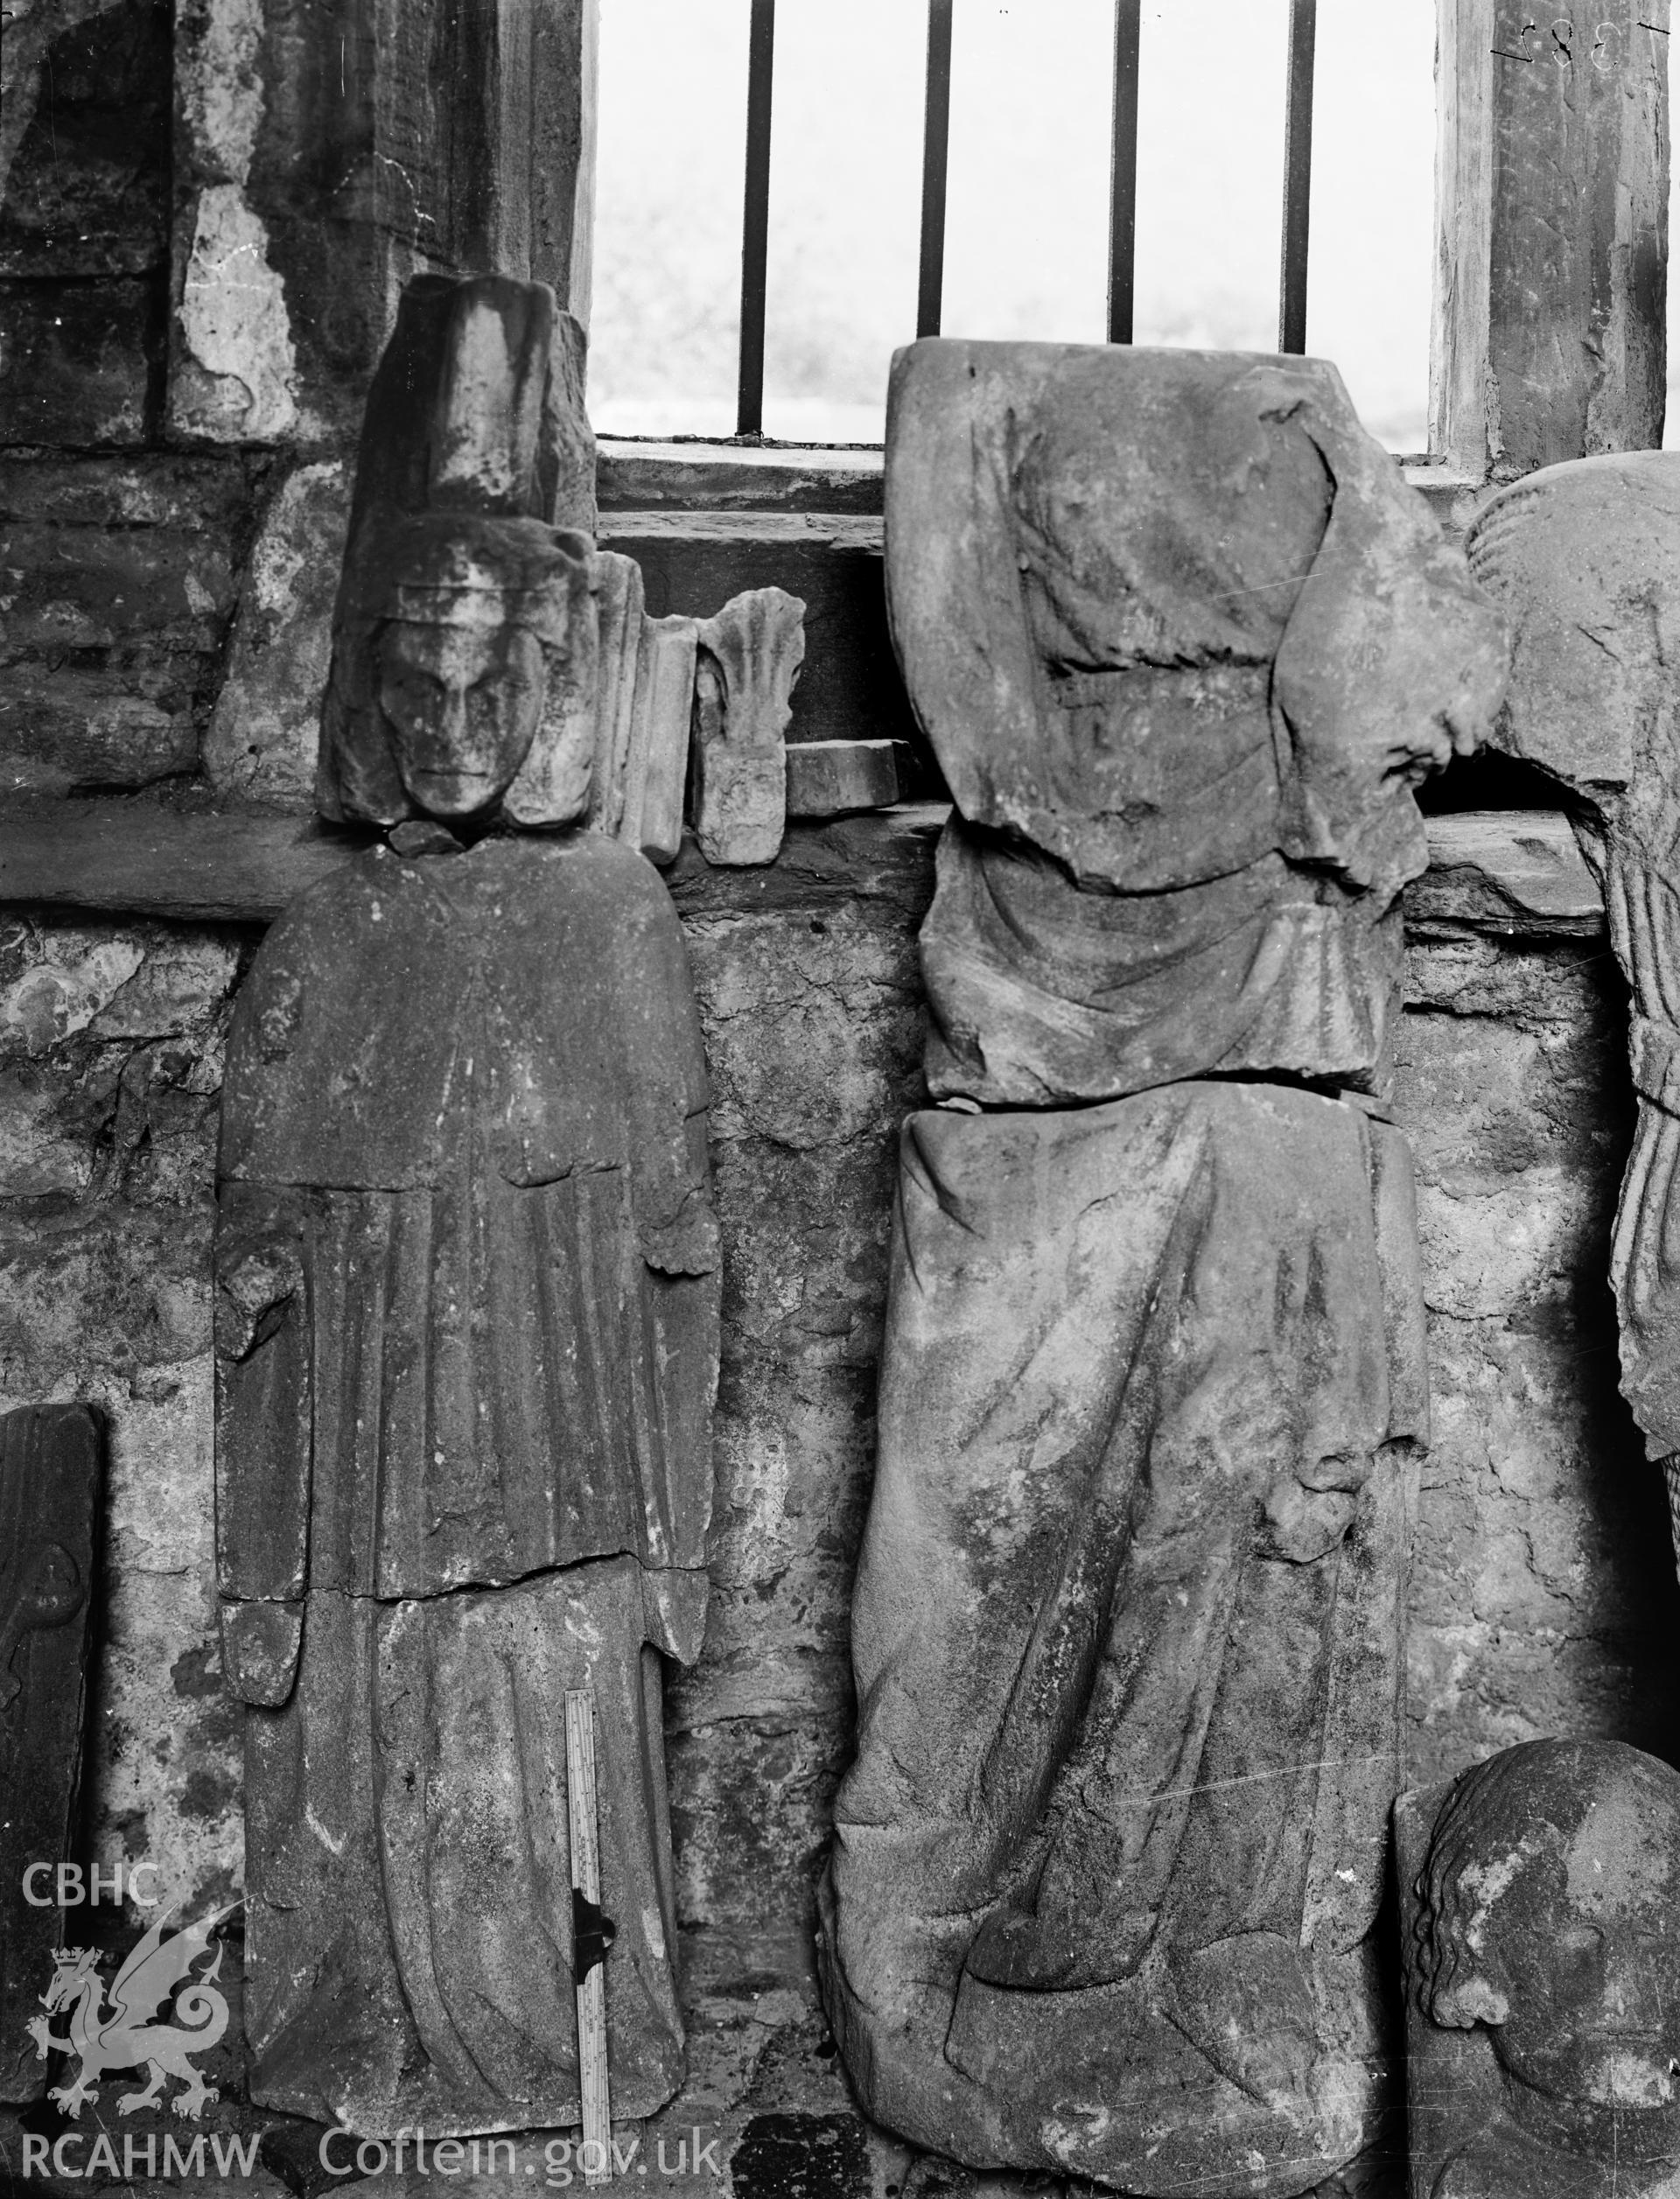 Tintern Abbey; black and white photographic print showing carved figures, part of the Ministry of Works Collection.